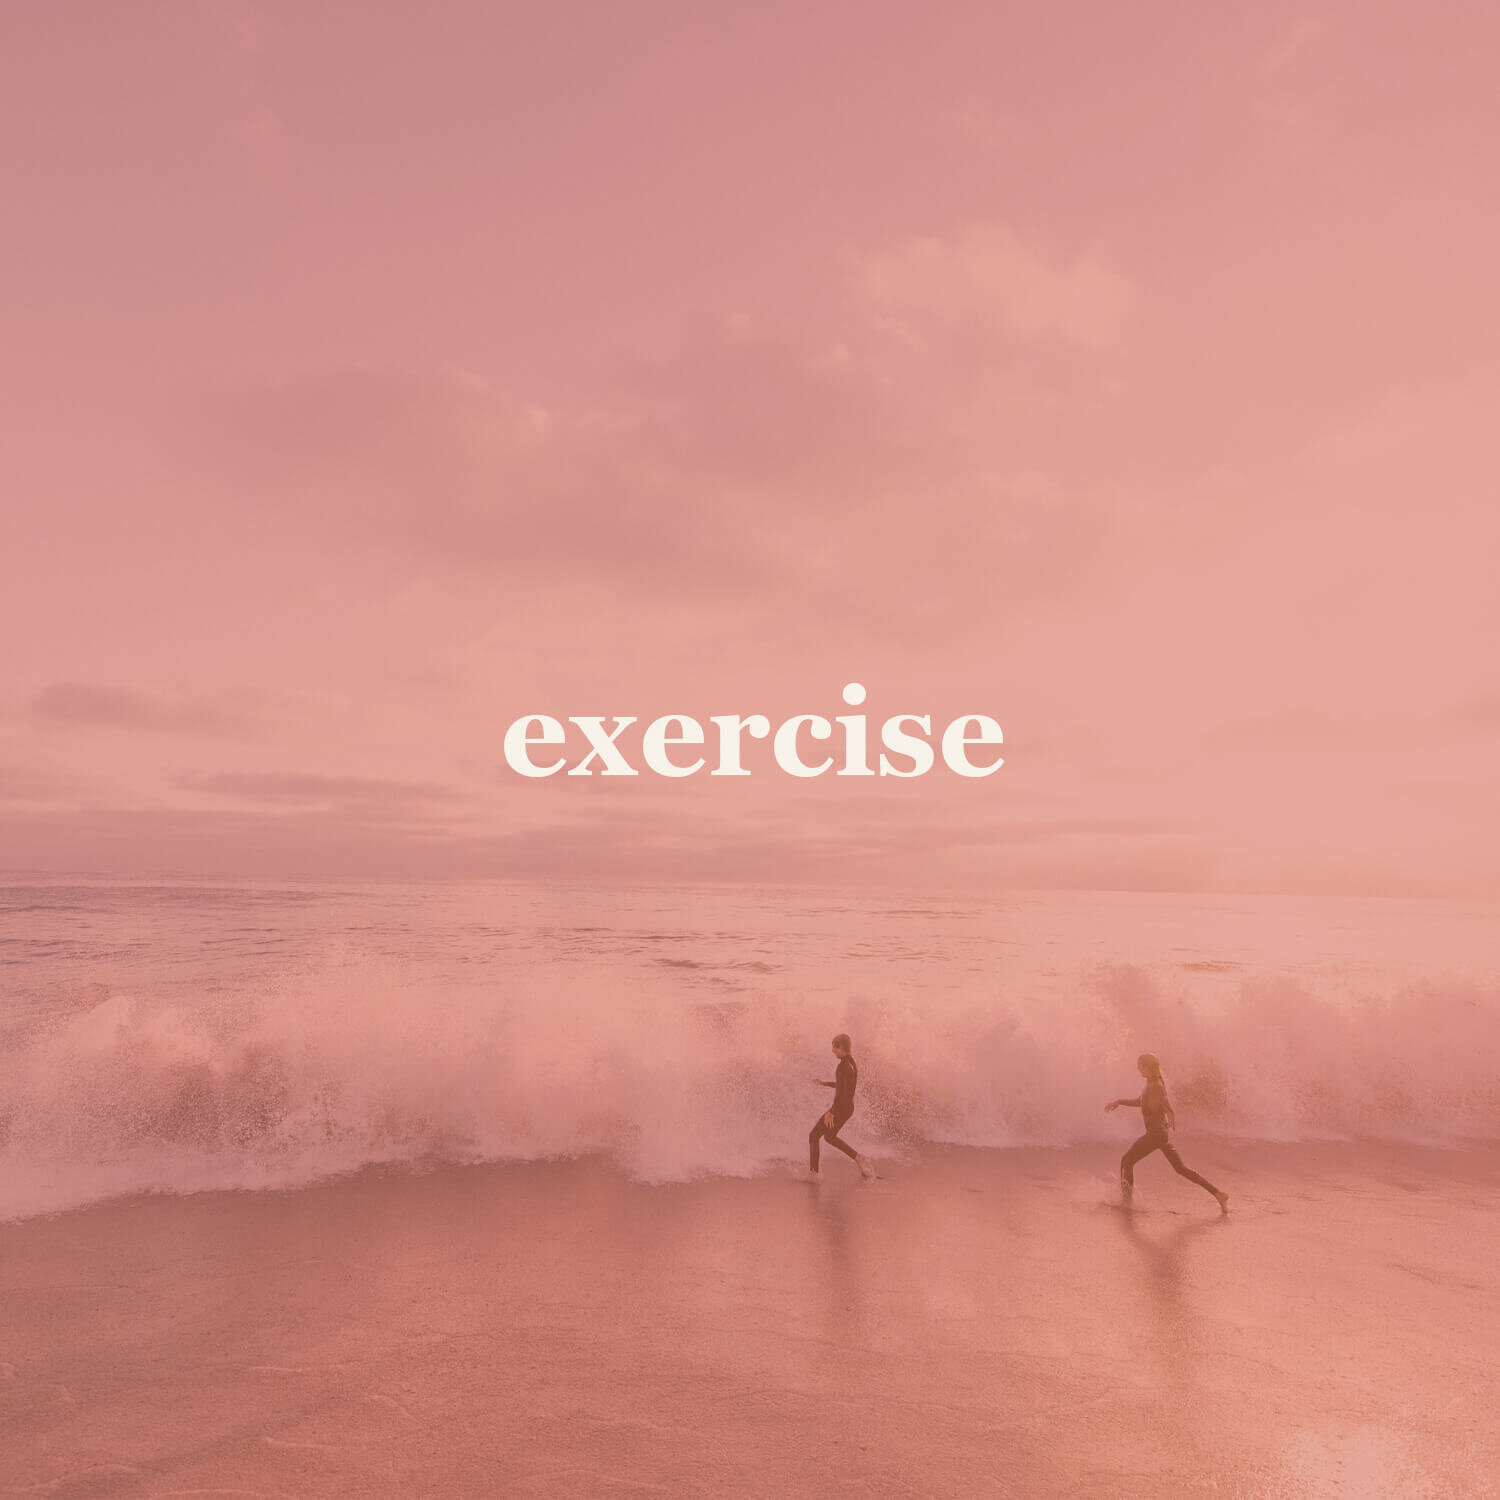 just-be-whole-exercise.jpg